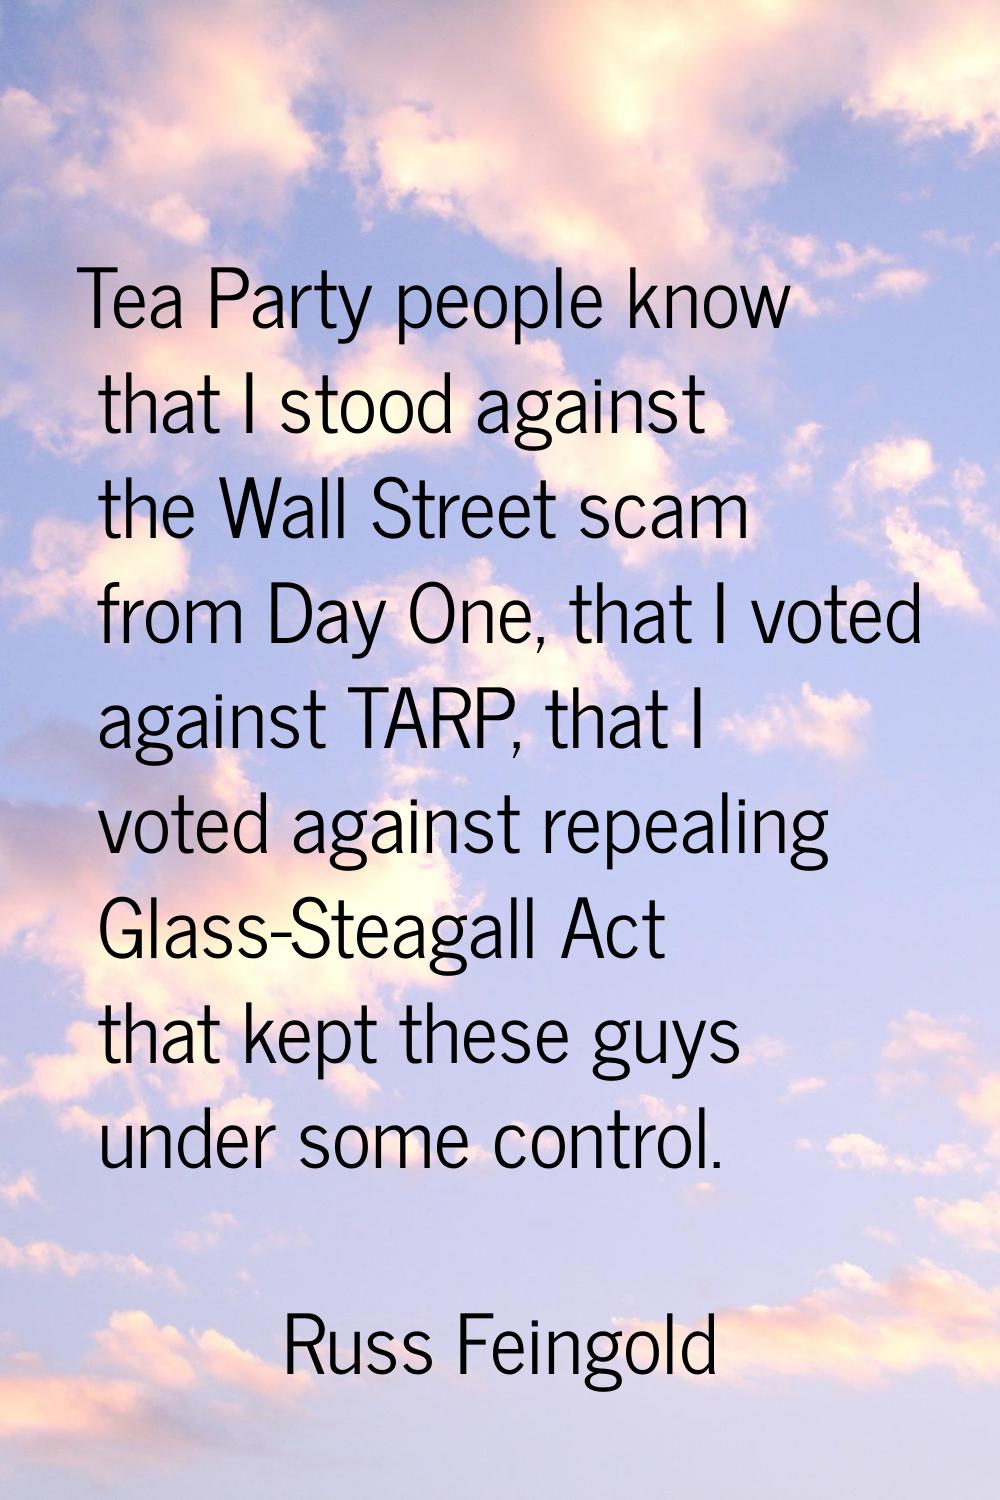 Tea Party people know that I stood against the Wall Street scam from Day One, that I voted against 